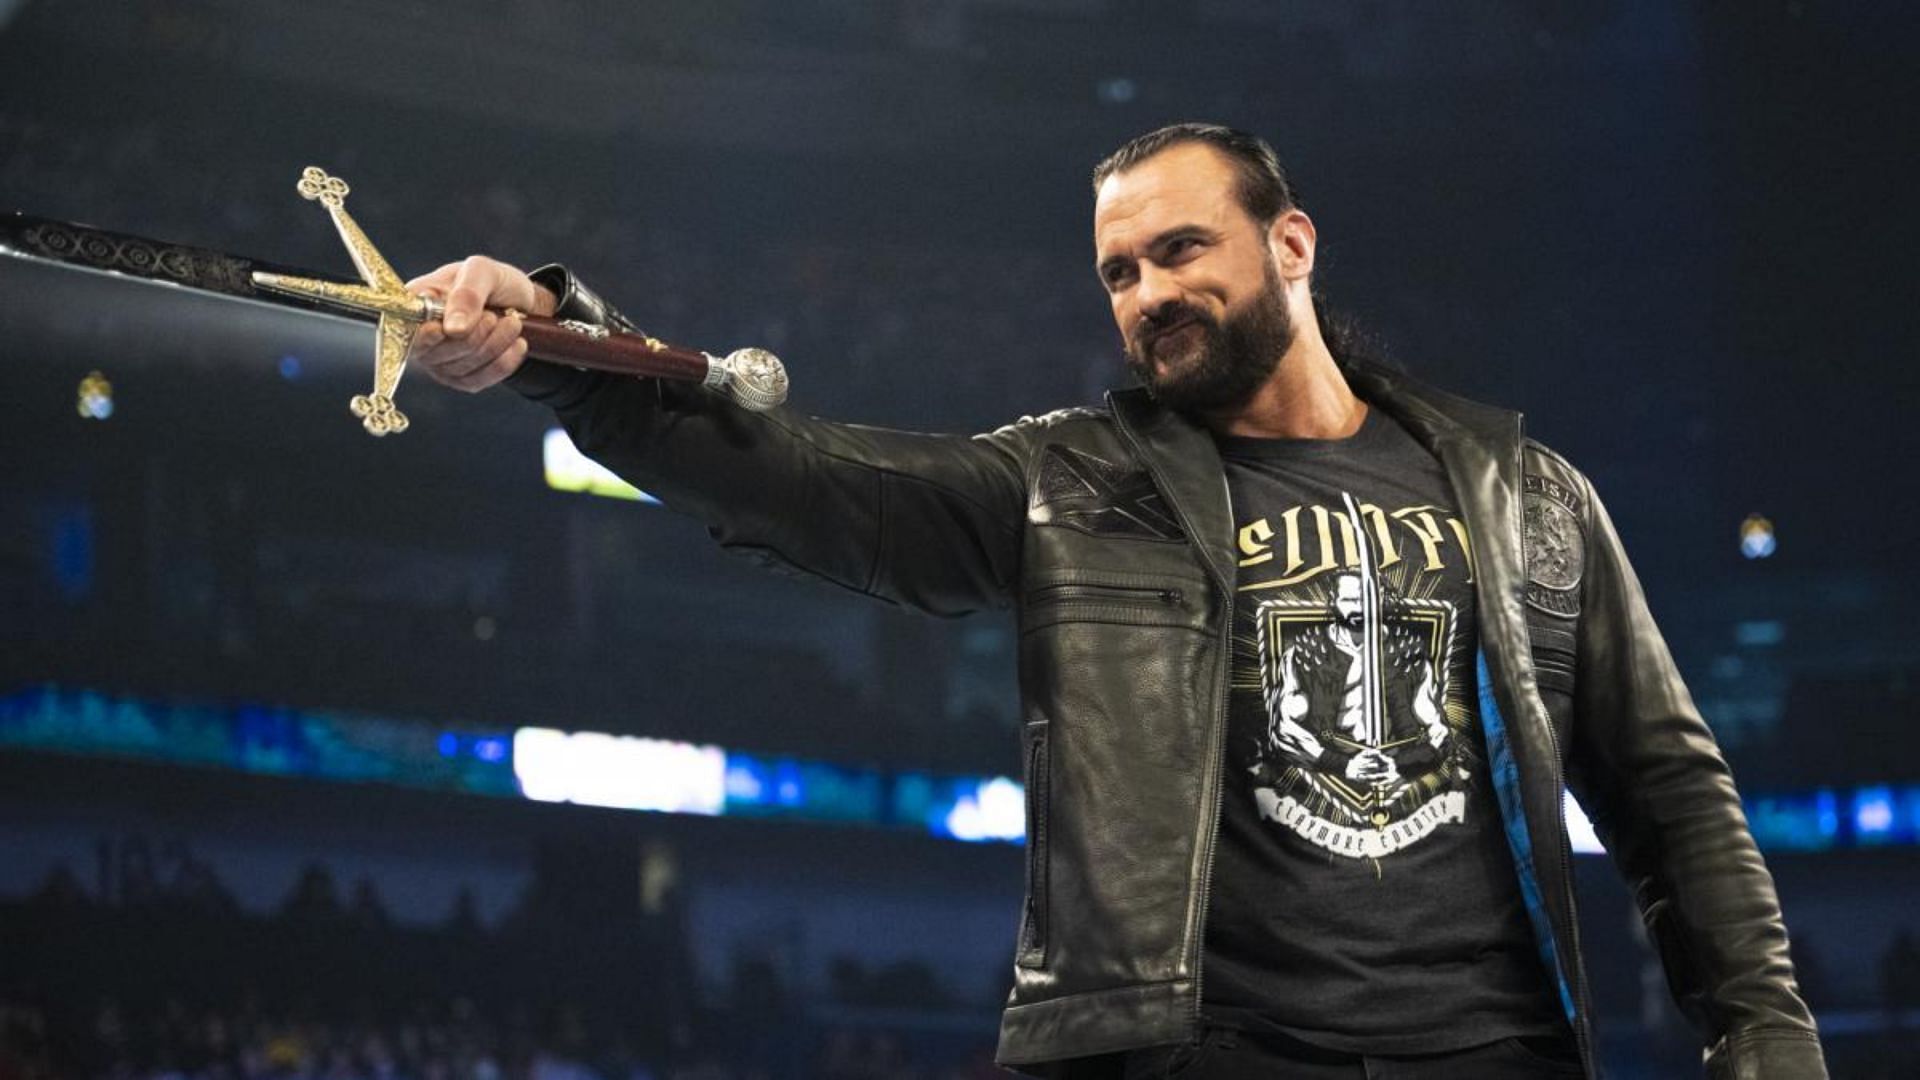 It was rumored Drew McIntyre would face Gunther at WrestleMania 39